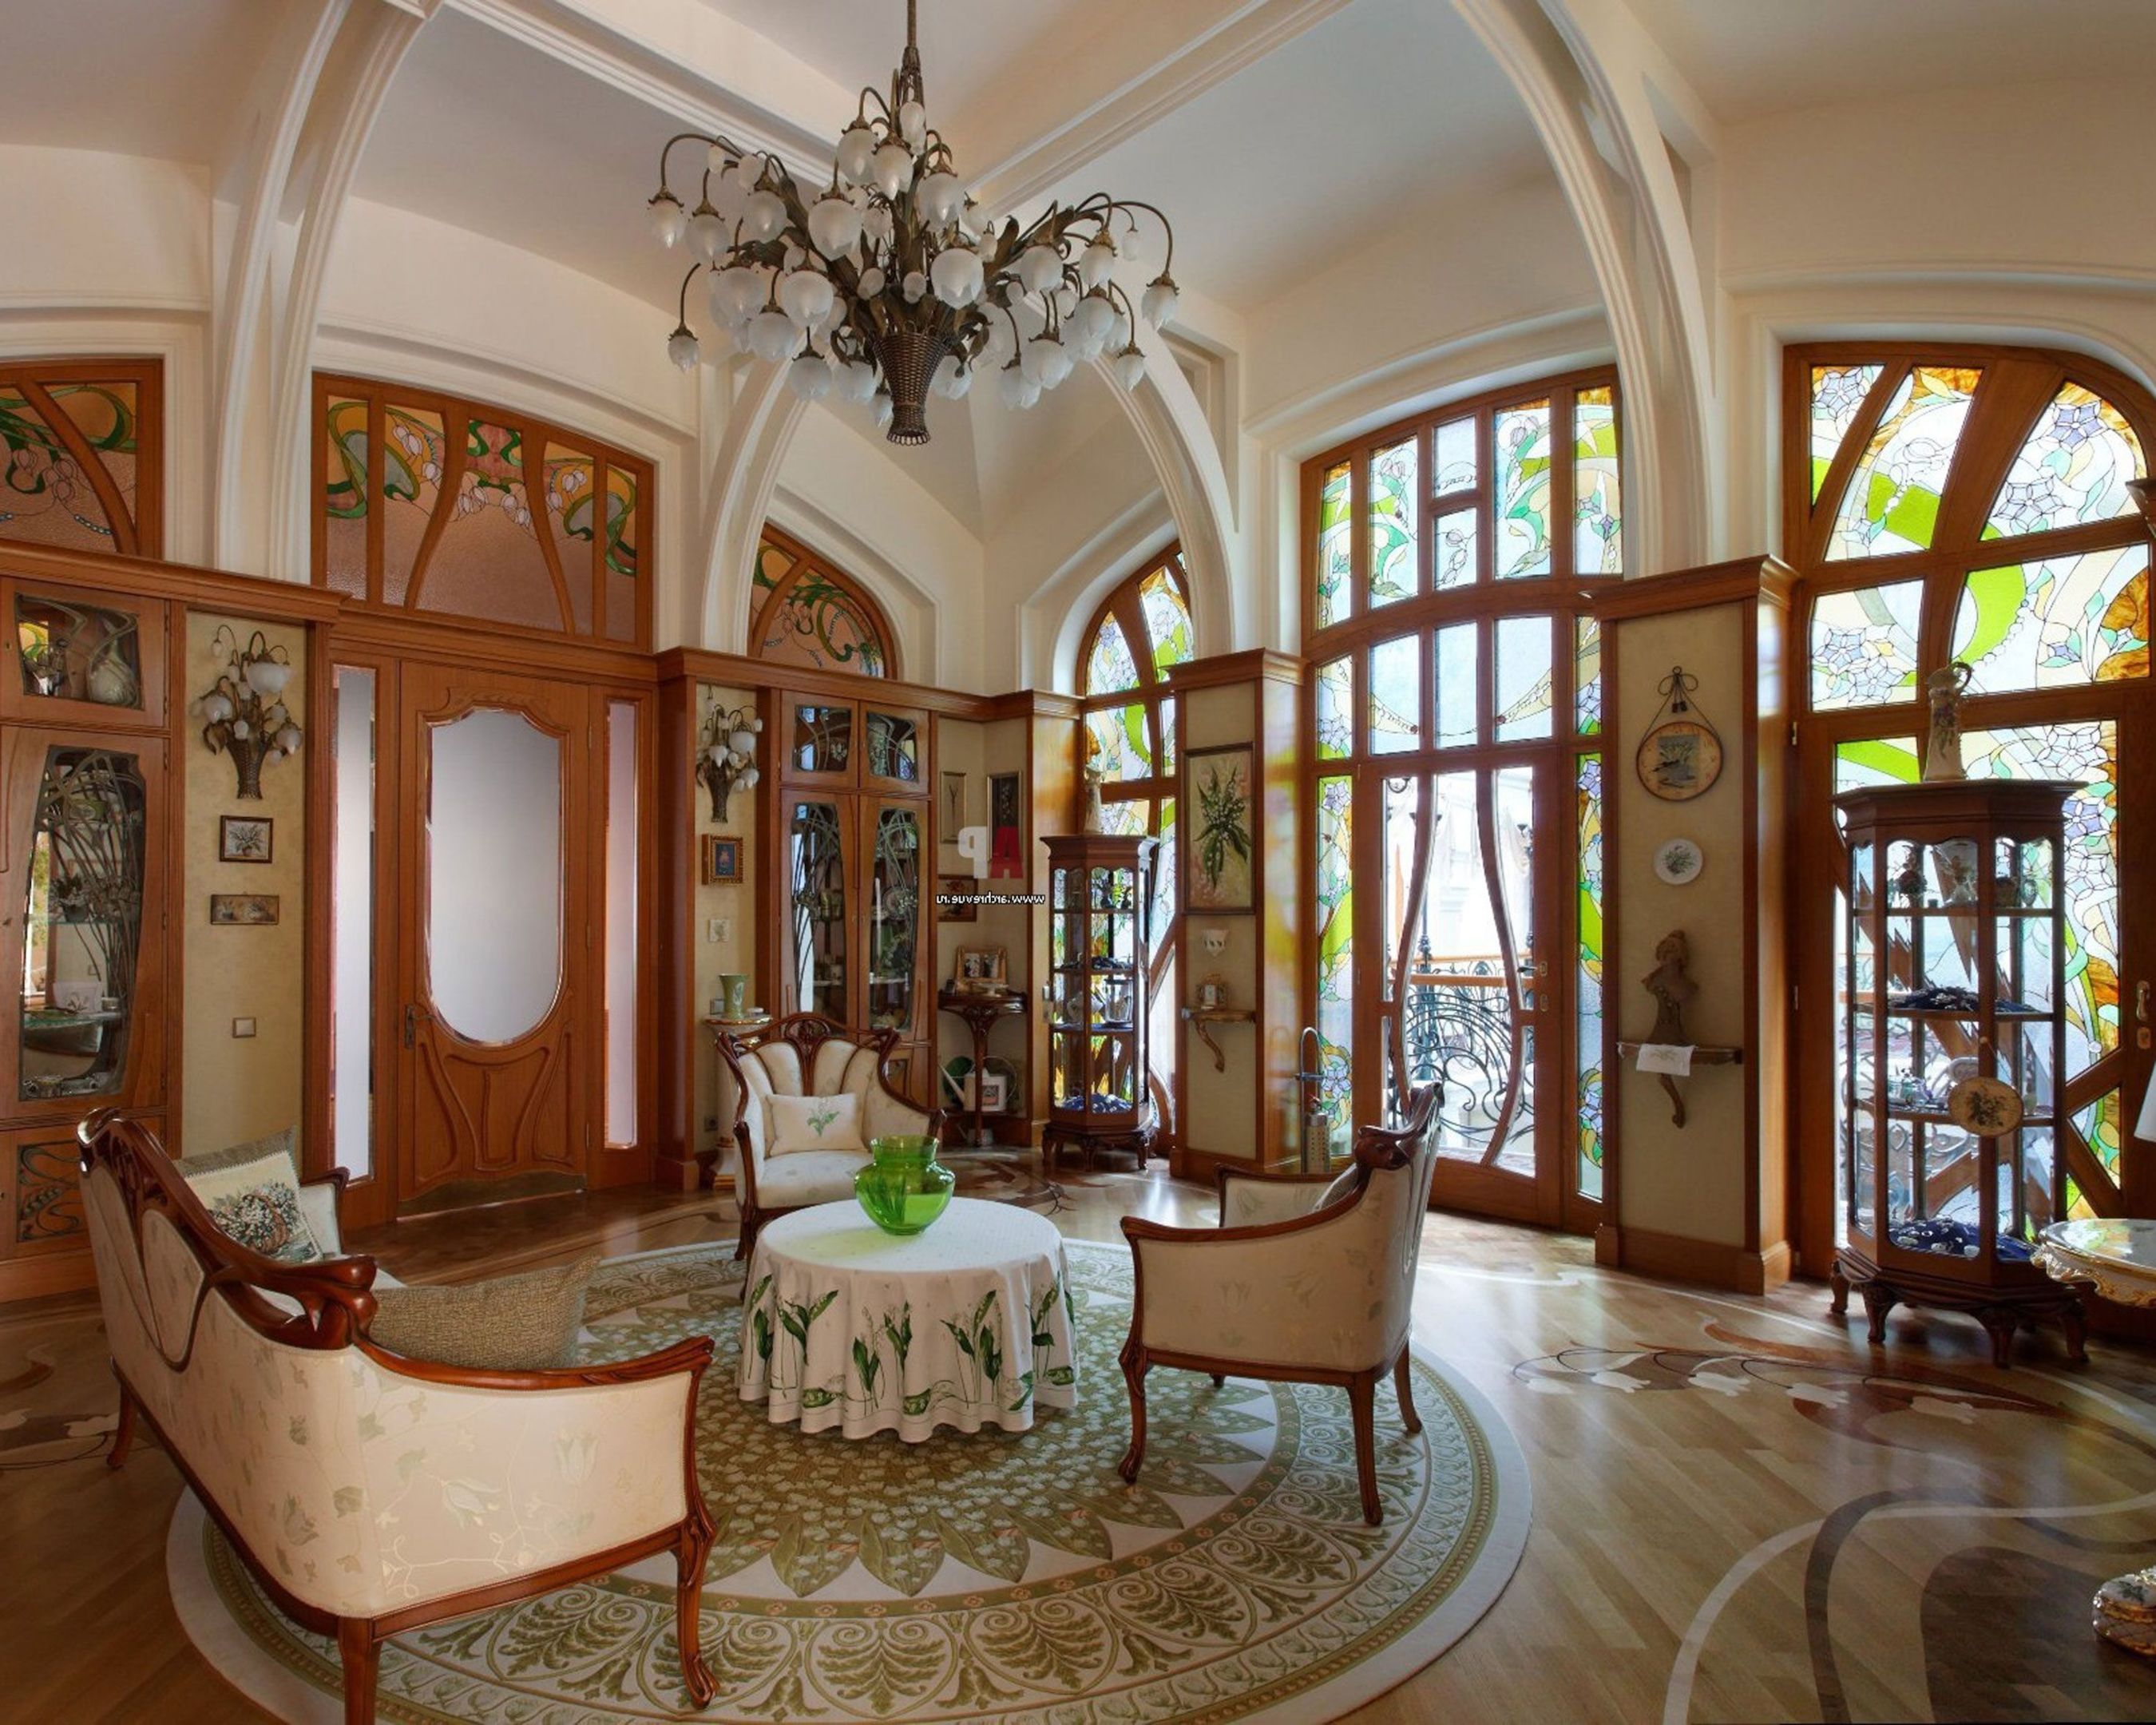 Art Nouveau interior design with its style, decor and colors